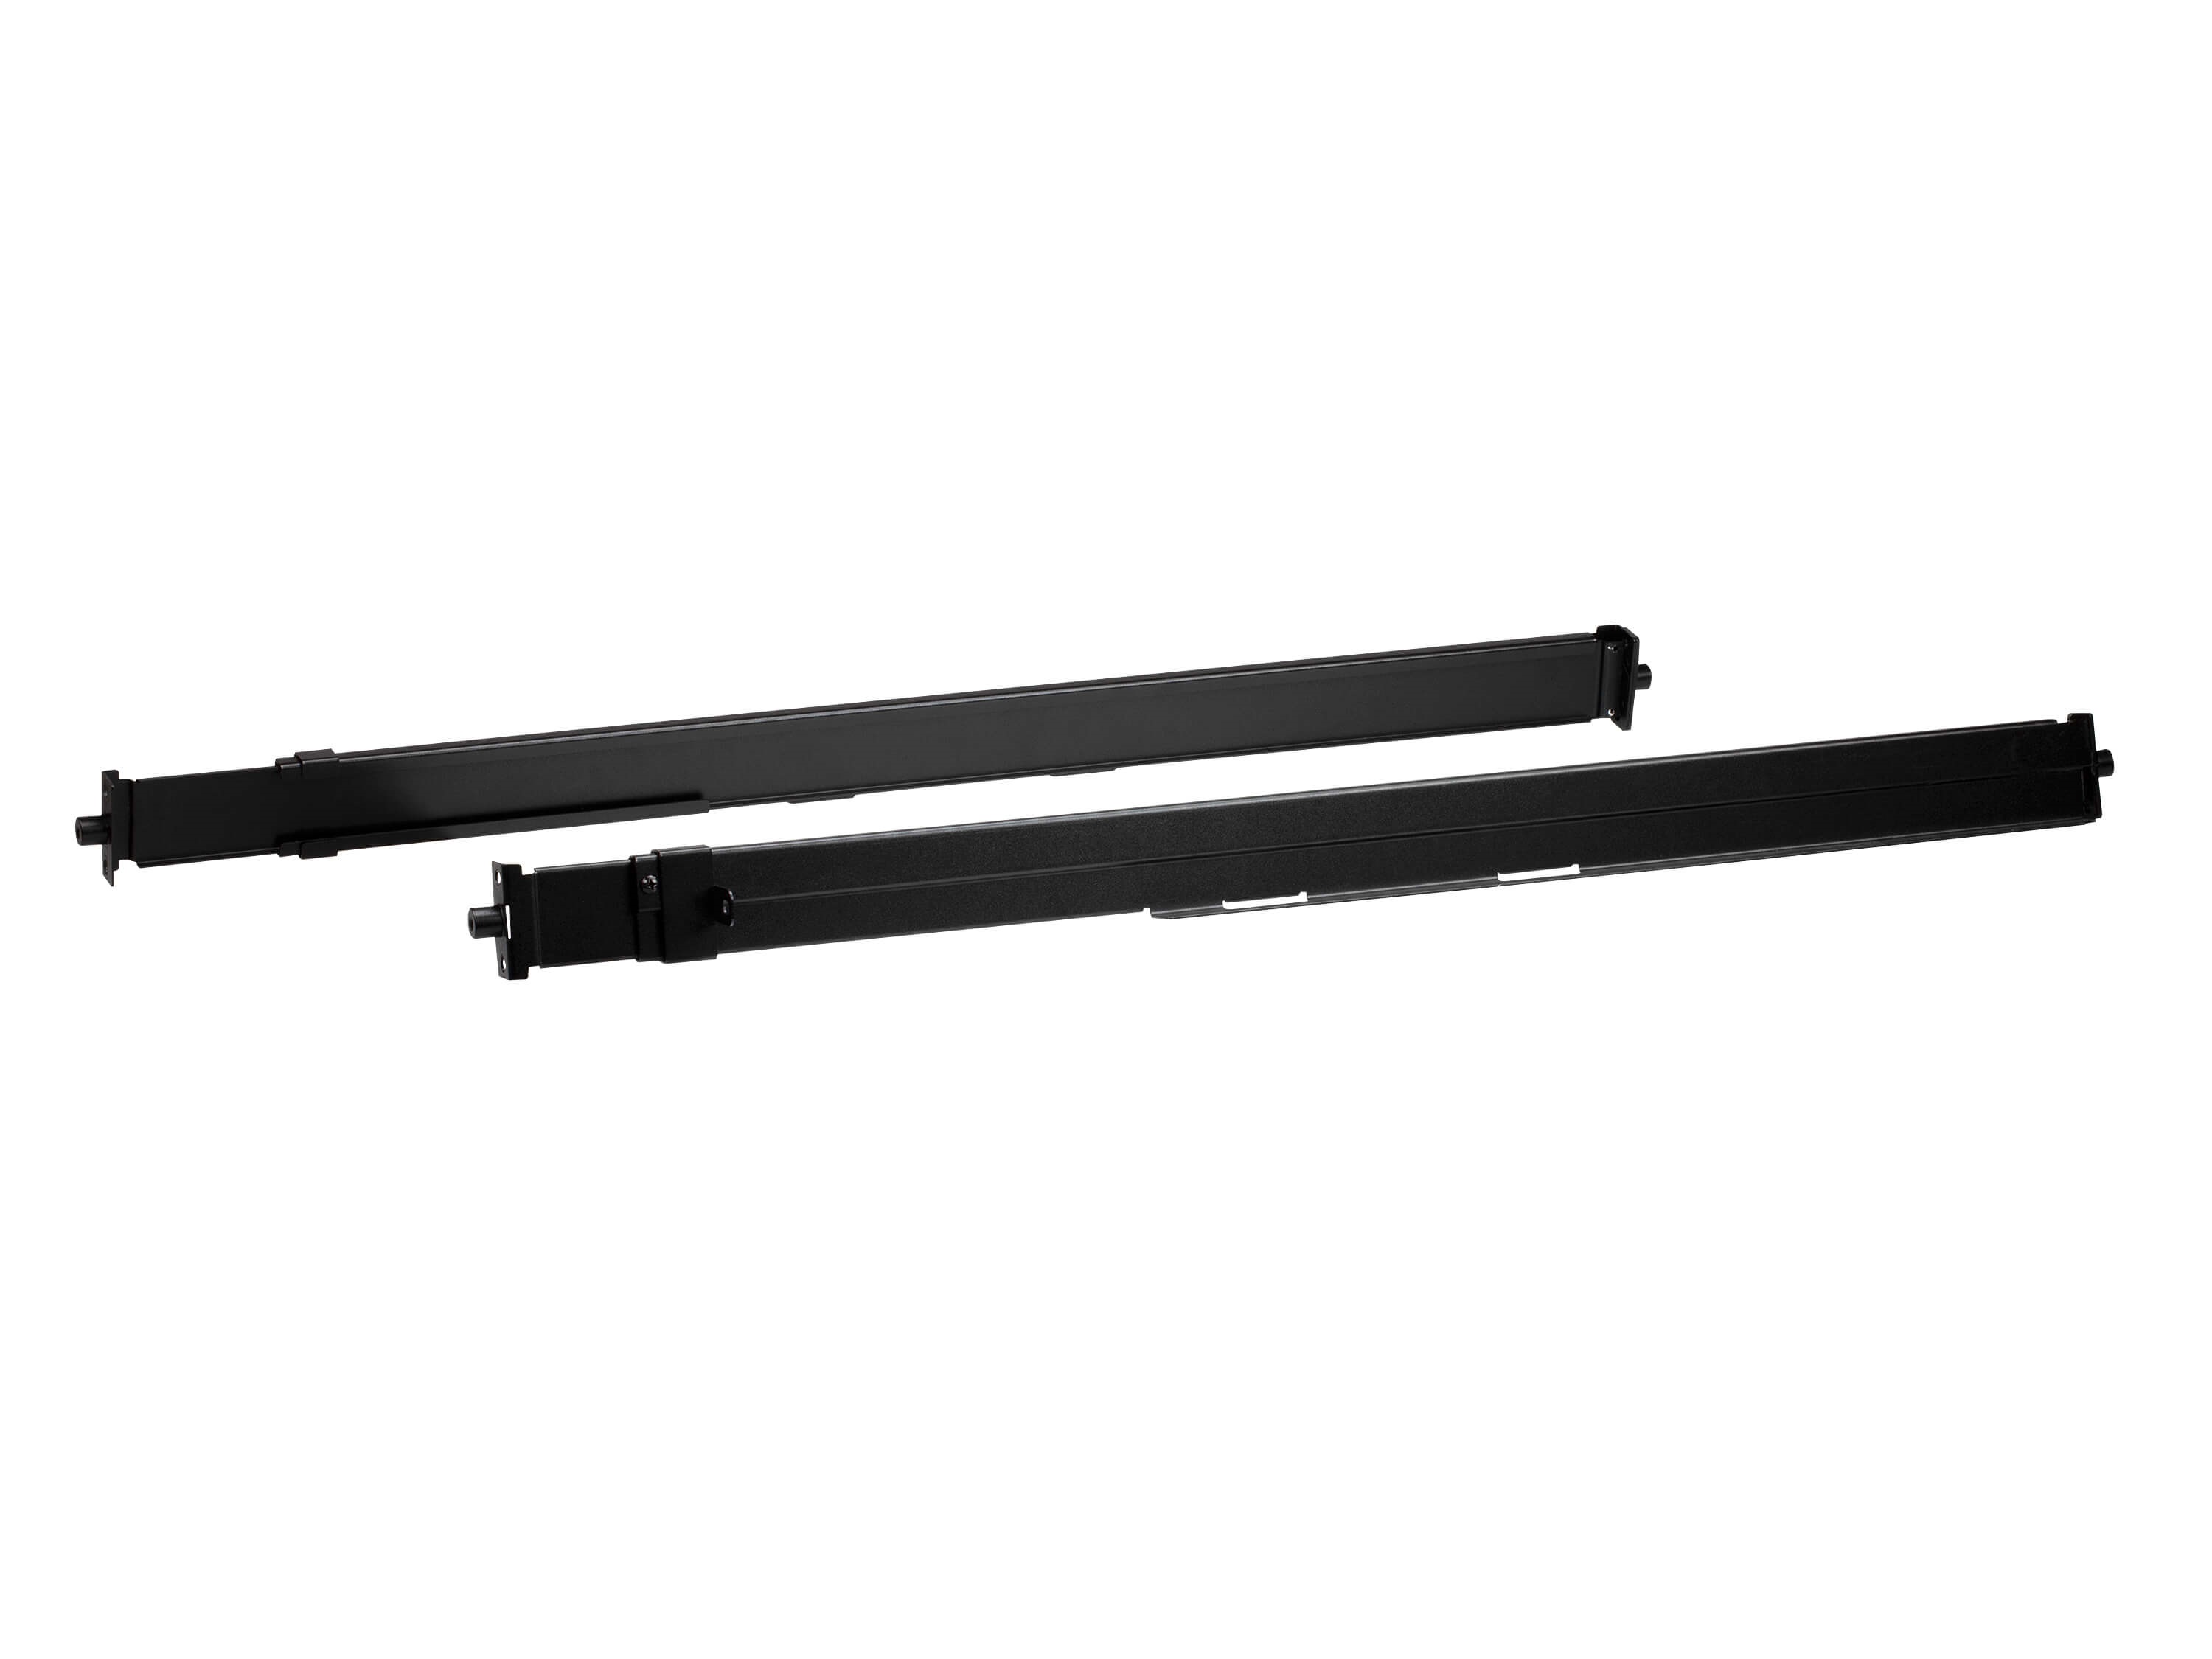 2K-0004 Easy Installation Rack Mount Kit (Long) for LCD KVM Switch/Console by Aten